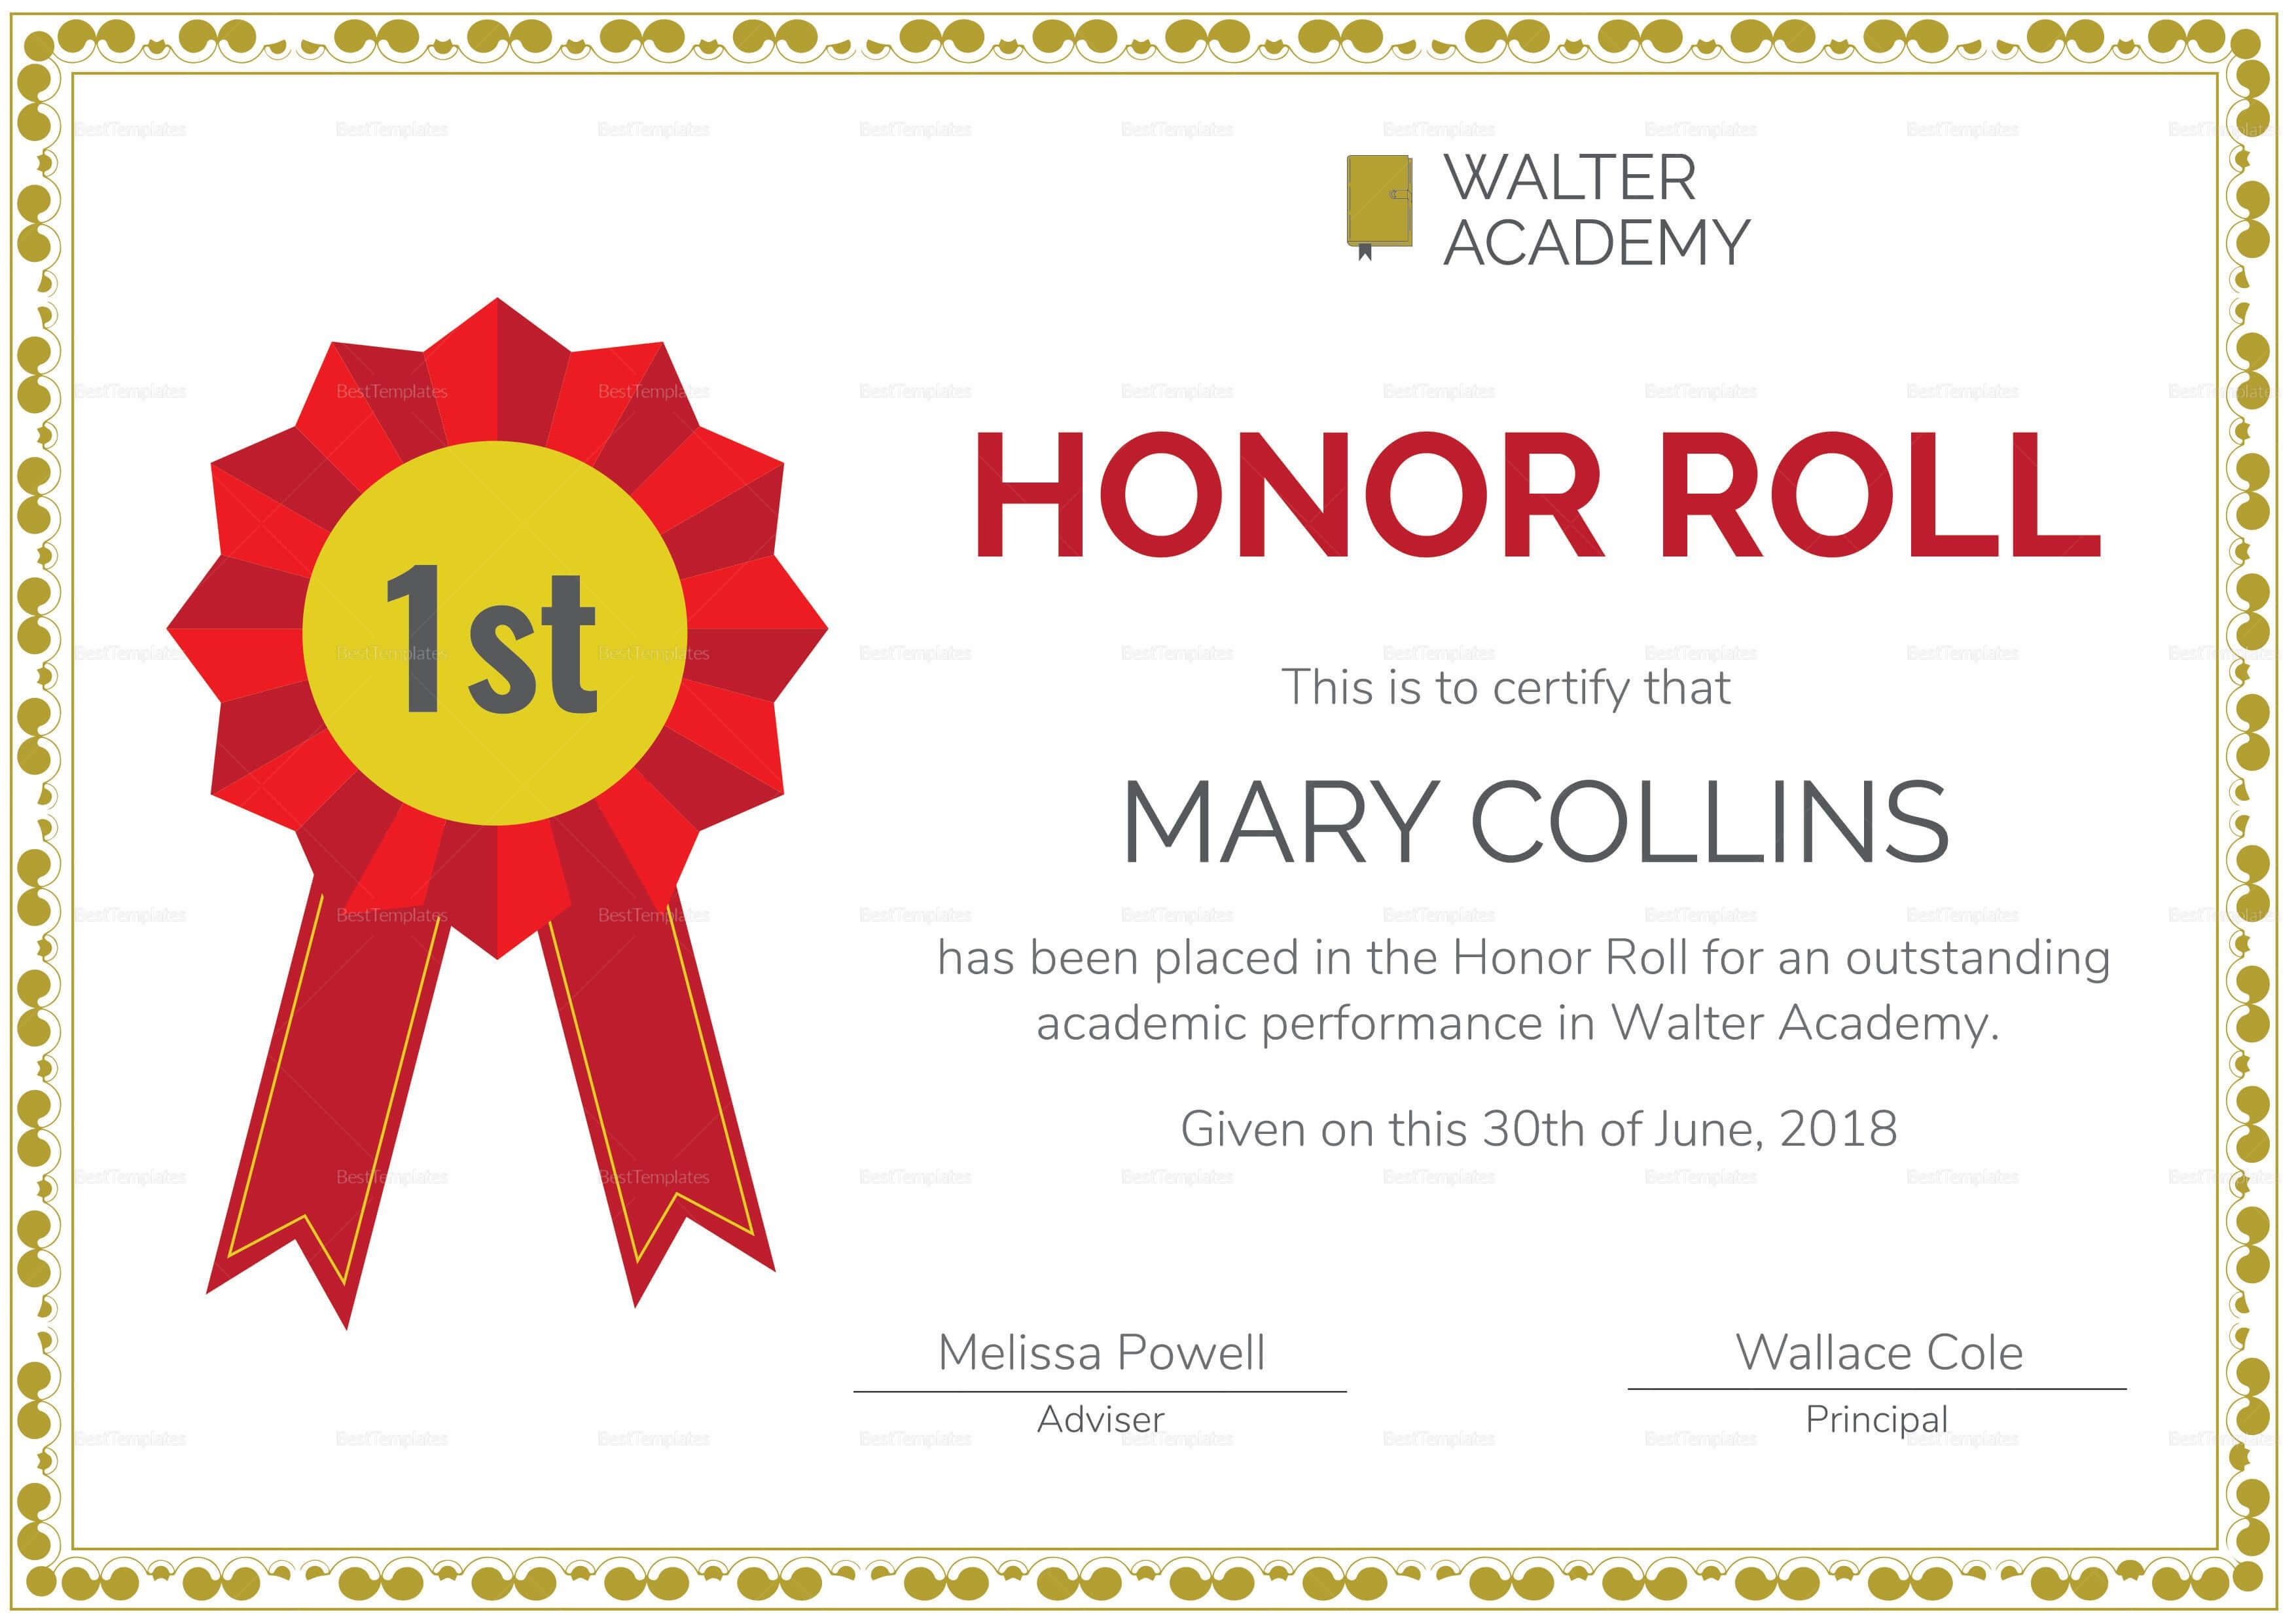 Honor Roll Certificate Template | Awards Certificates Intended For Honor Roll Certificate Template